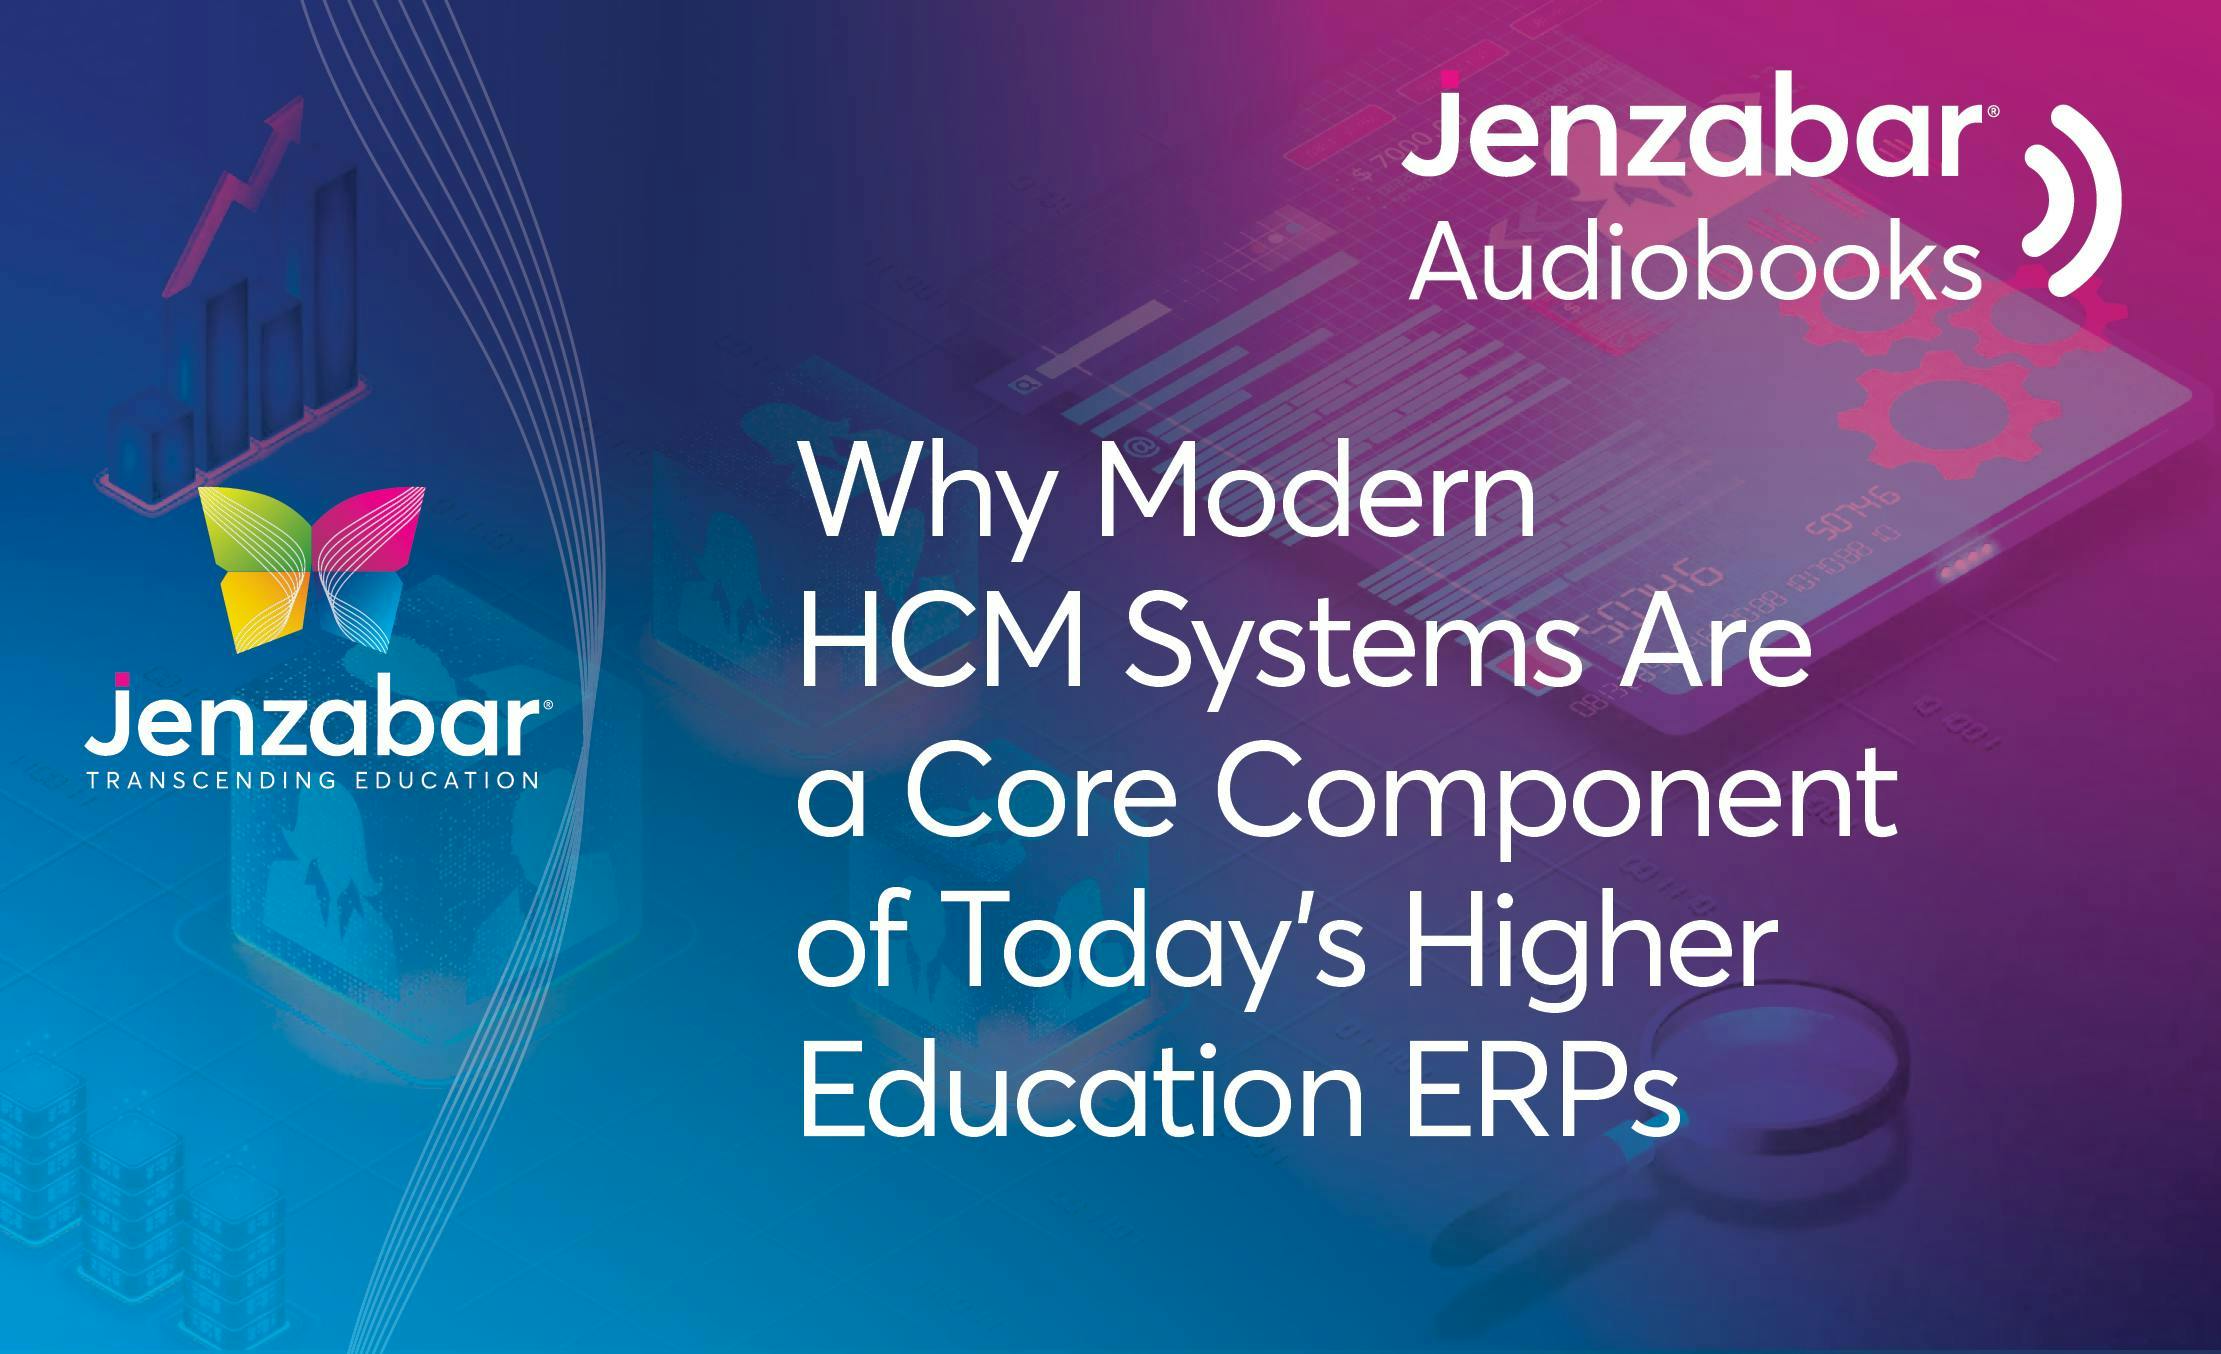 Audiobook: Why Modern HCM Systems Are a Core Component of Today’s Higher Education ERPs